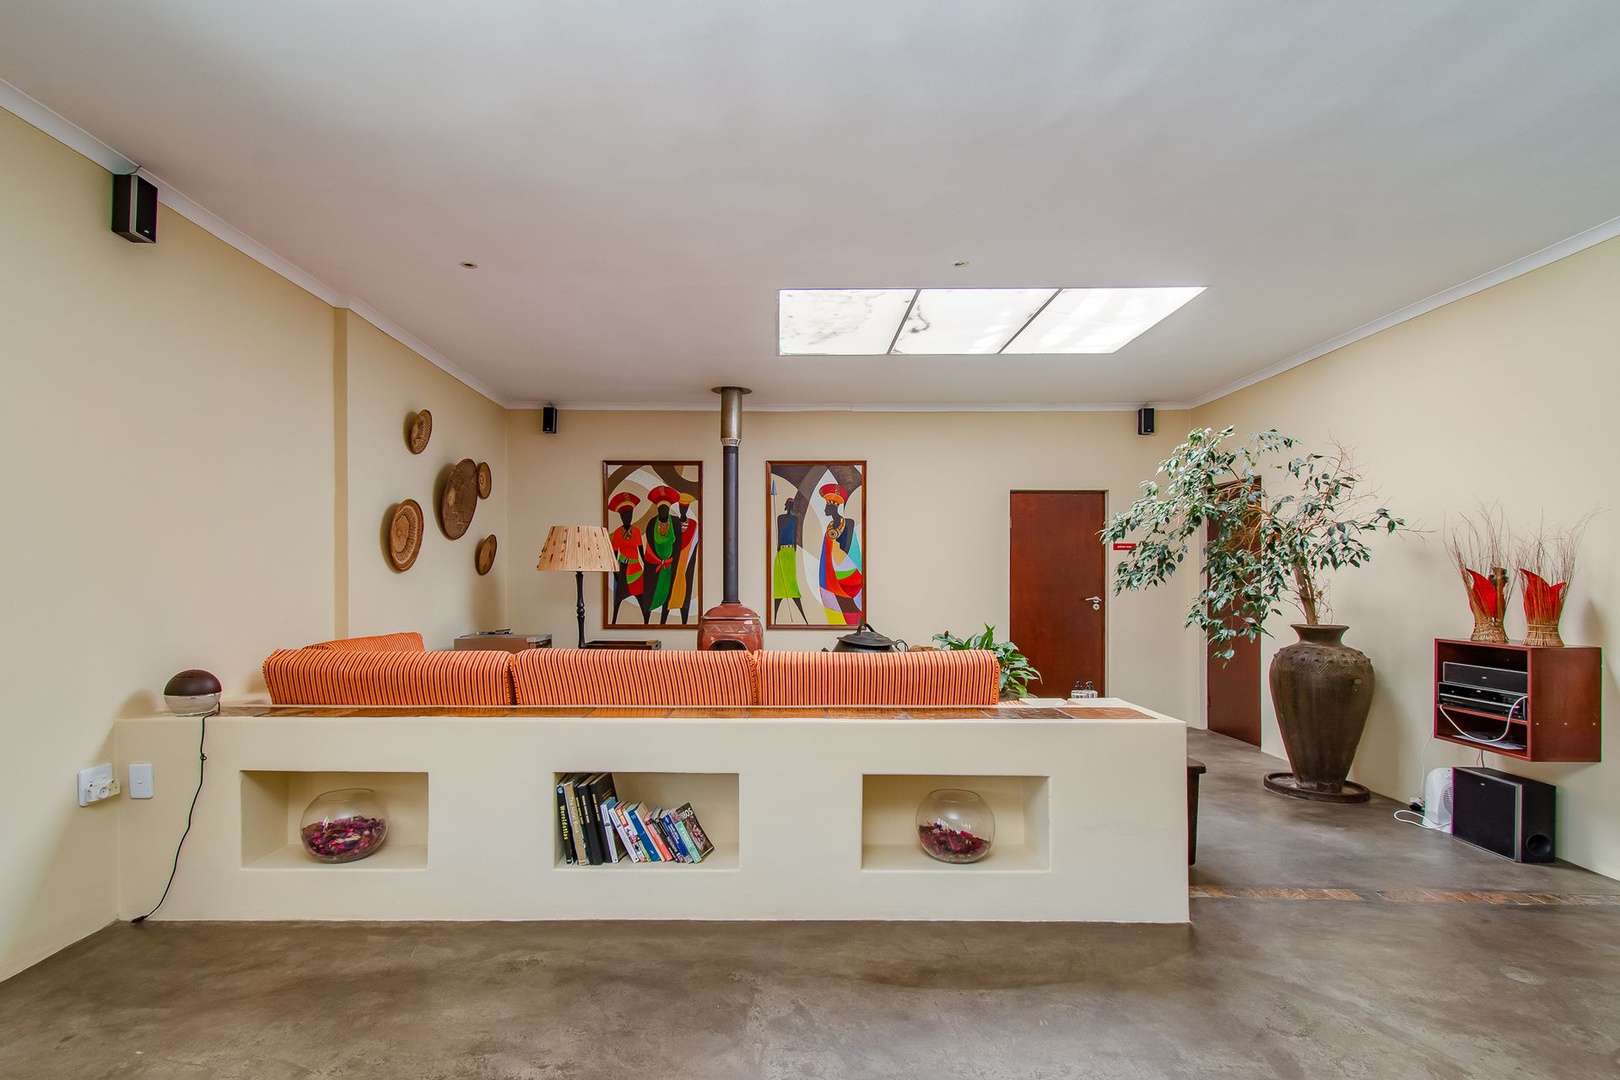 House in Pringle Bay Rural - Skylight allows natural light into the African inspired lounge area